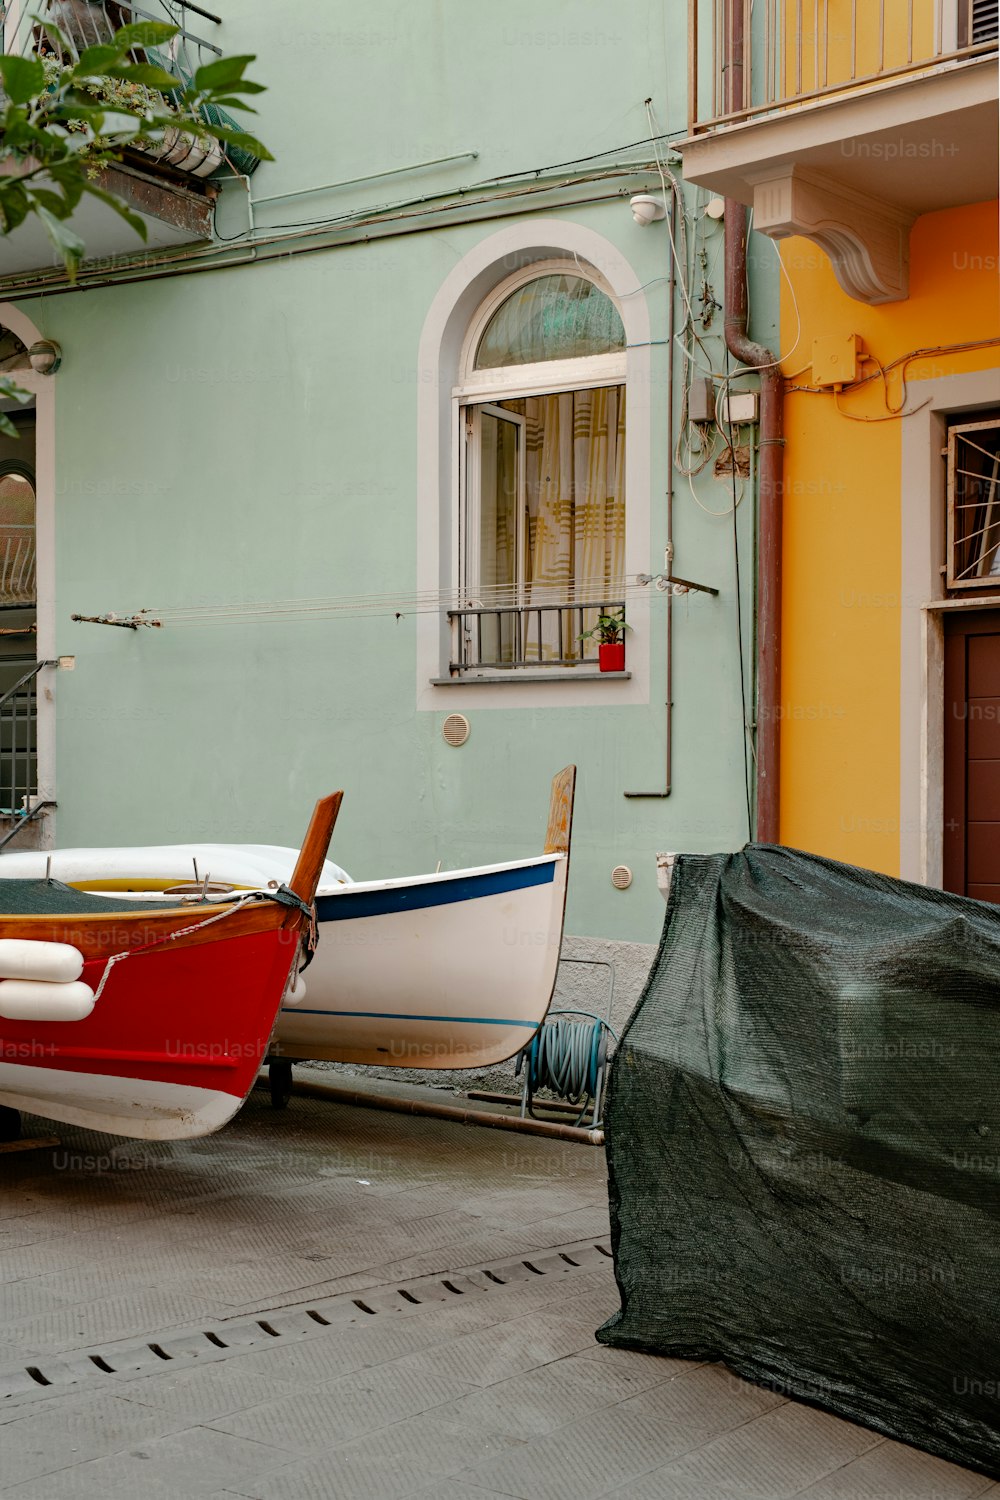 a couple of boats that are sitting in the street